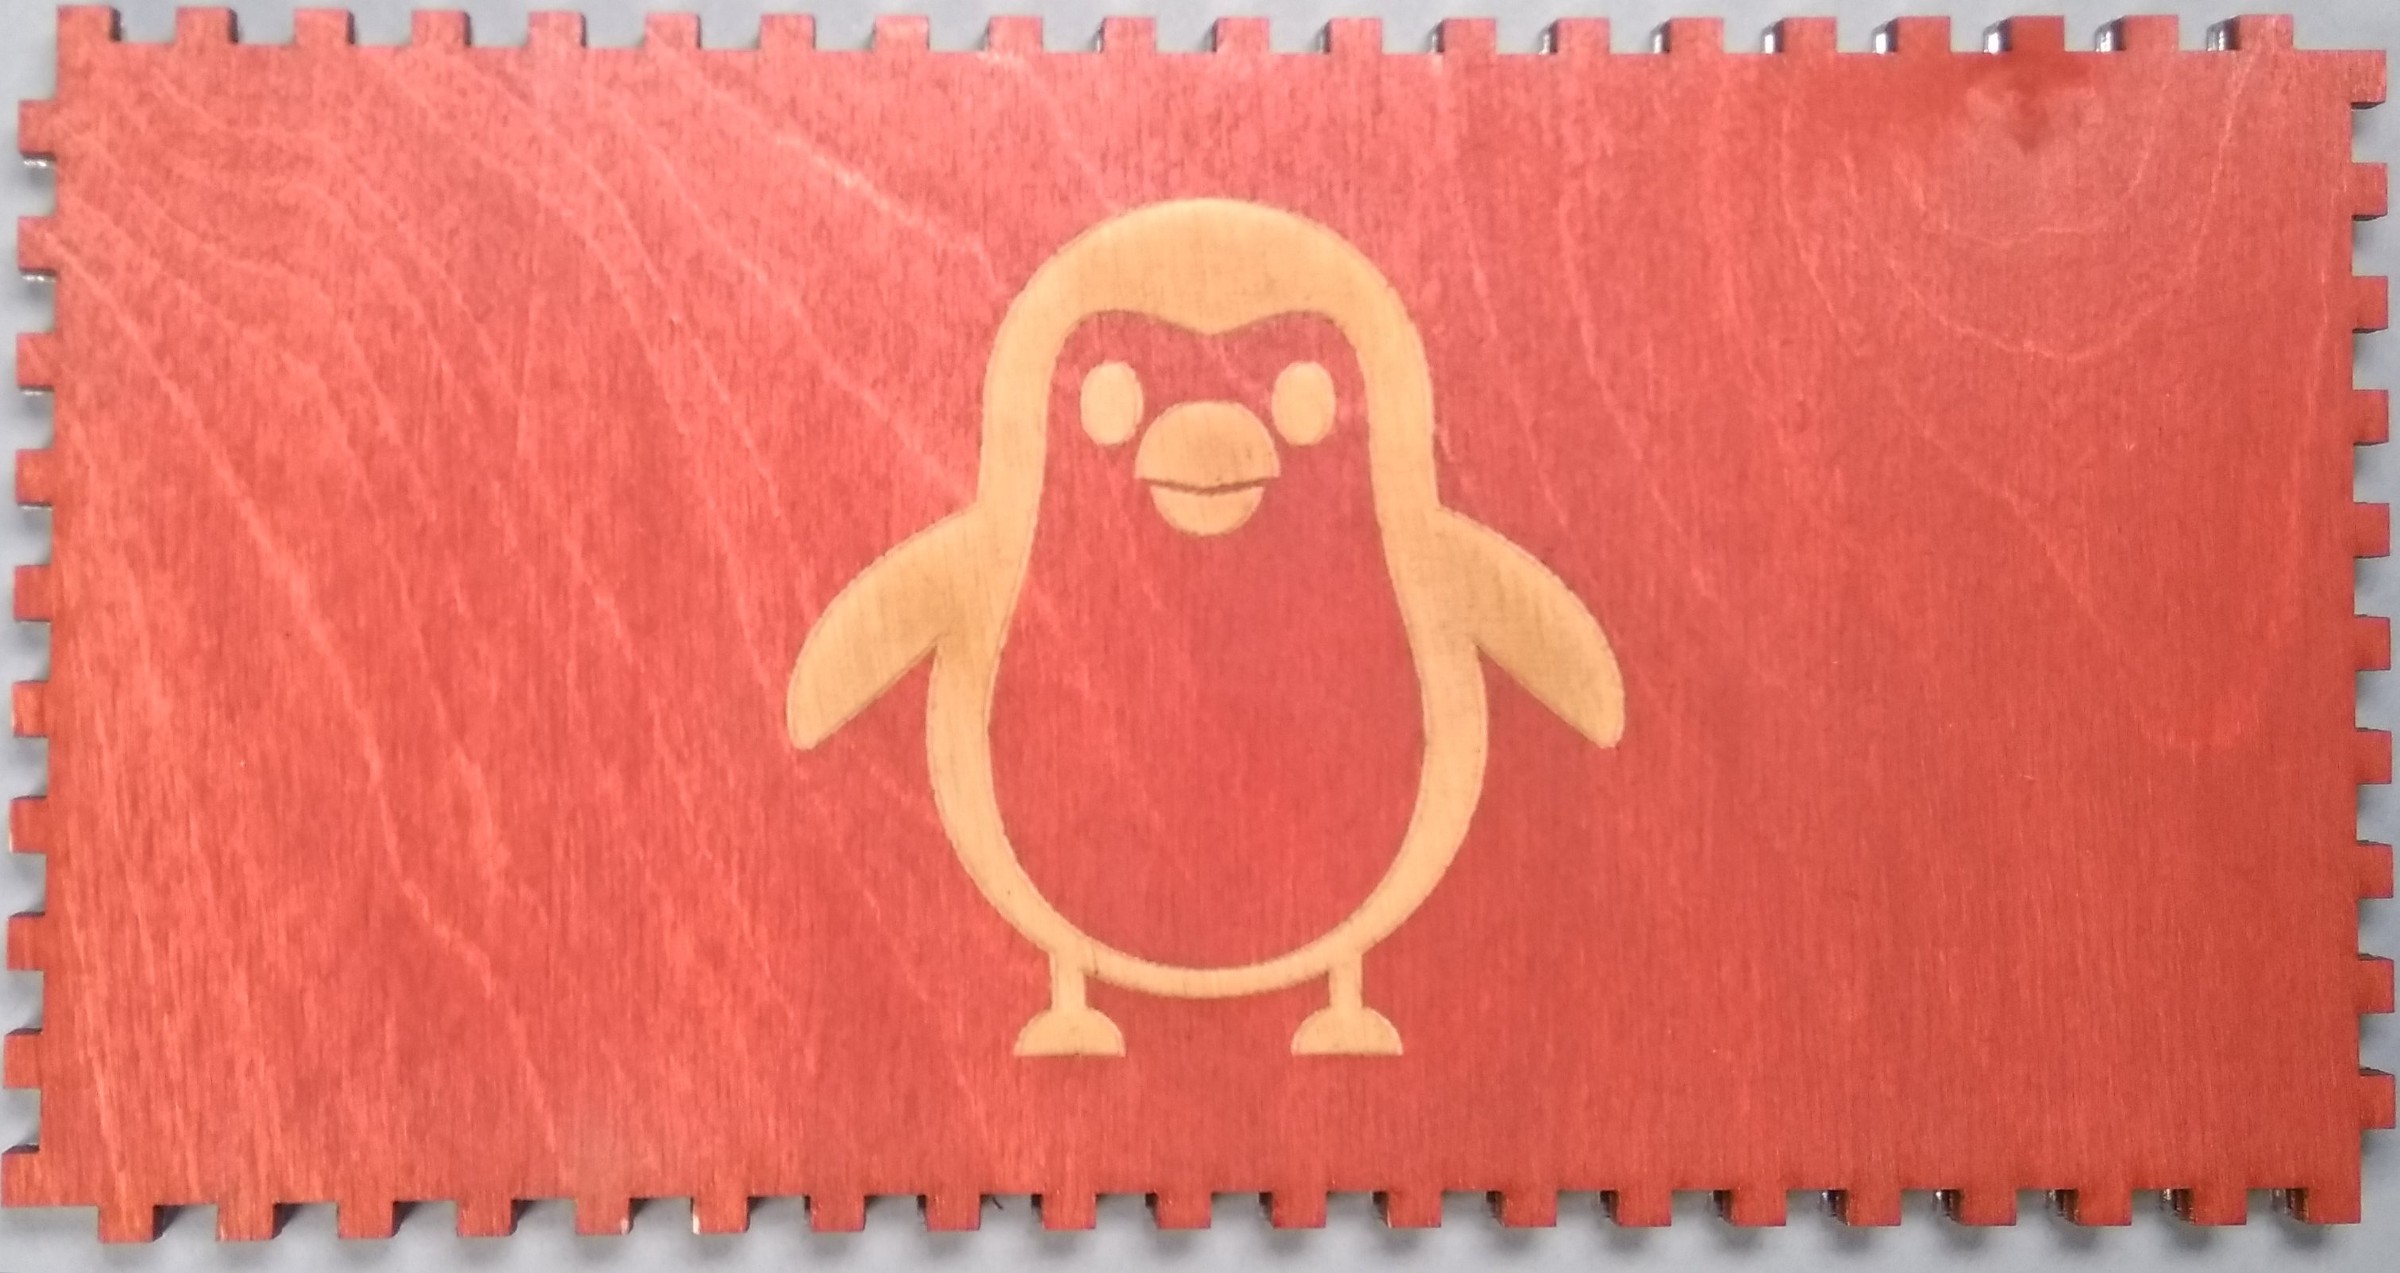 We raster engrave a penguin on the bottom of the box.